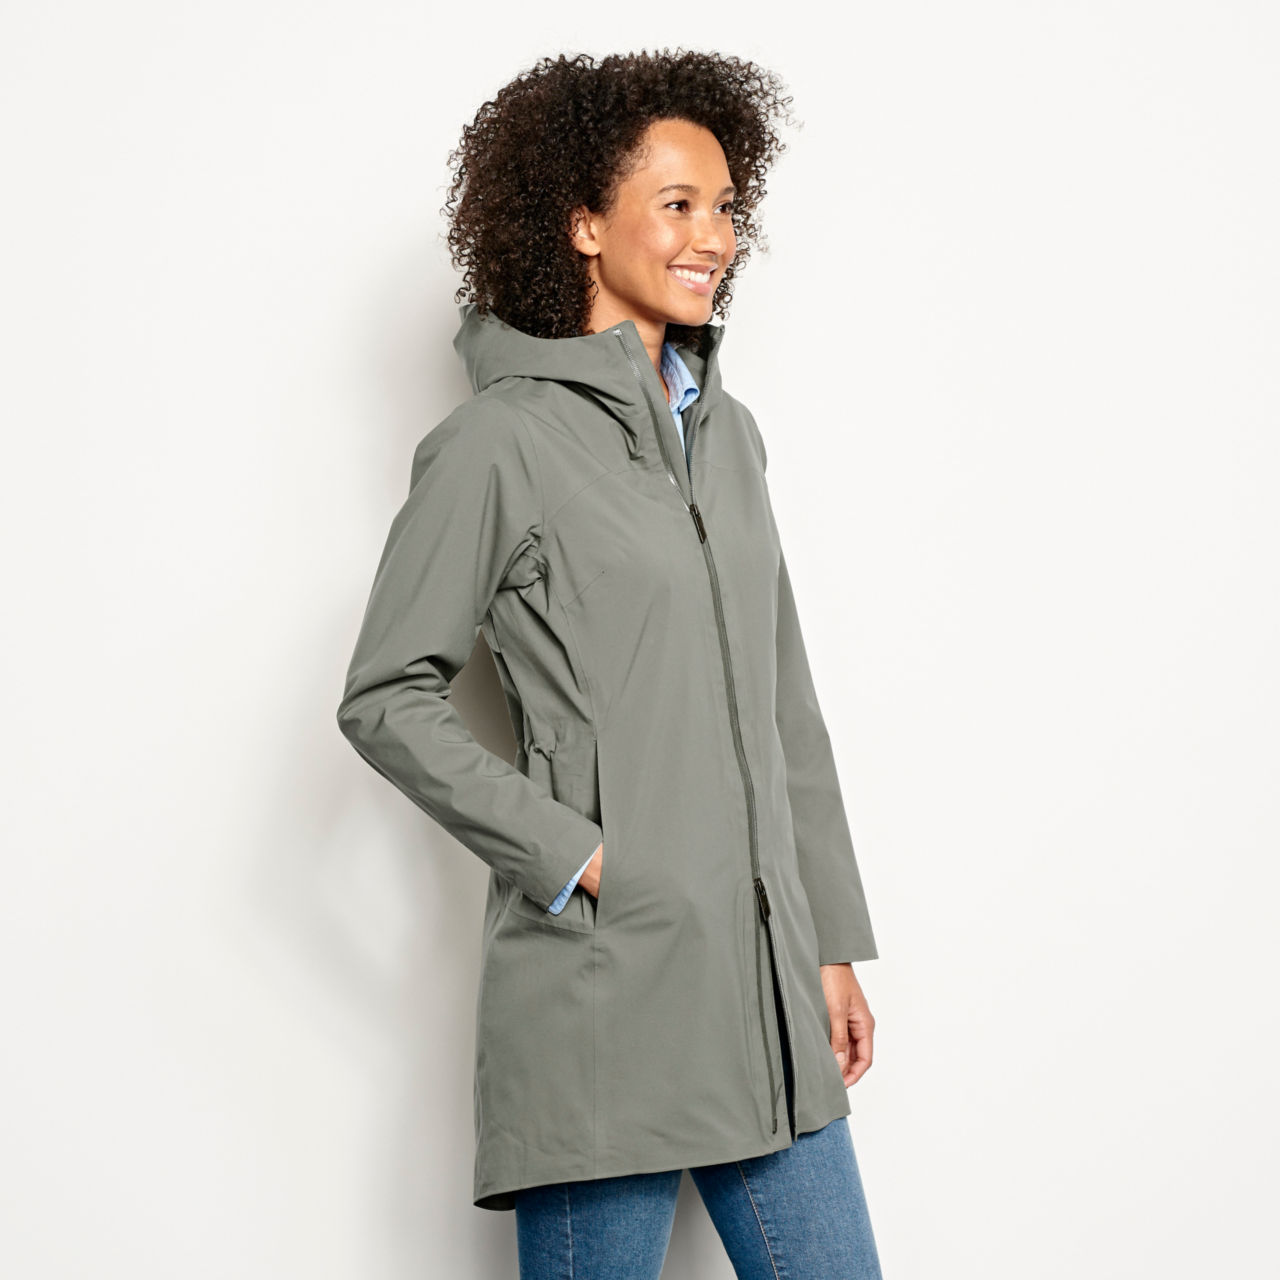 Women's Ultralight Waterproof City Jacket | Sagebrush | Size Large | Recycled Materials/Synthetic | Orvis